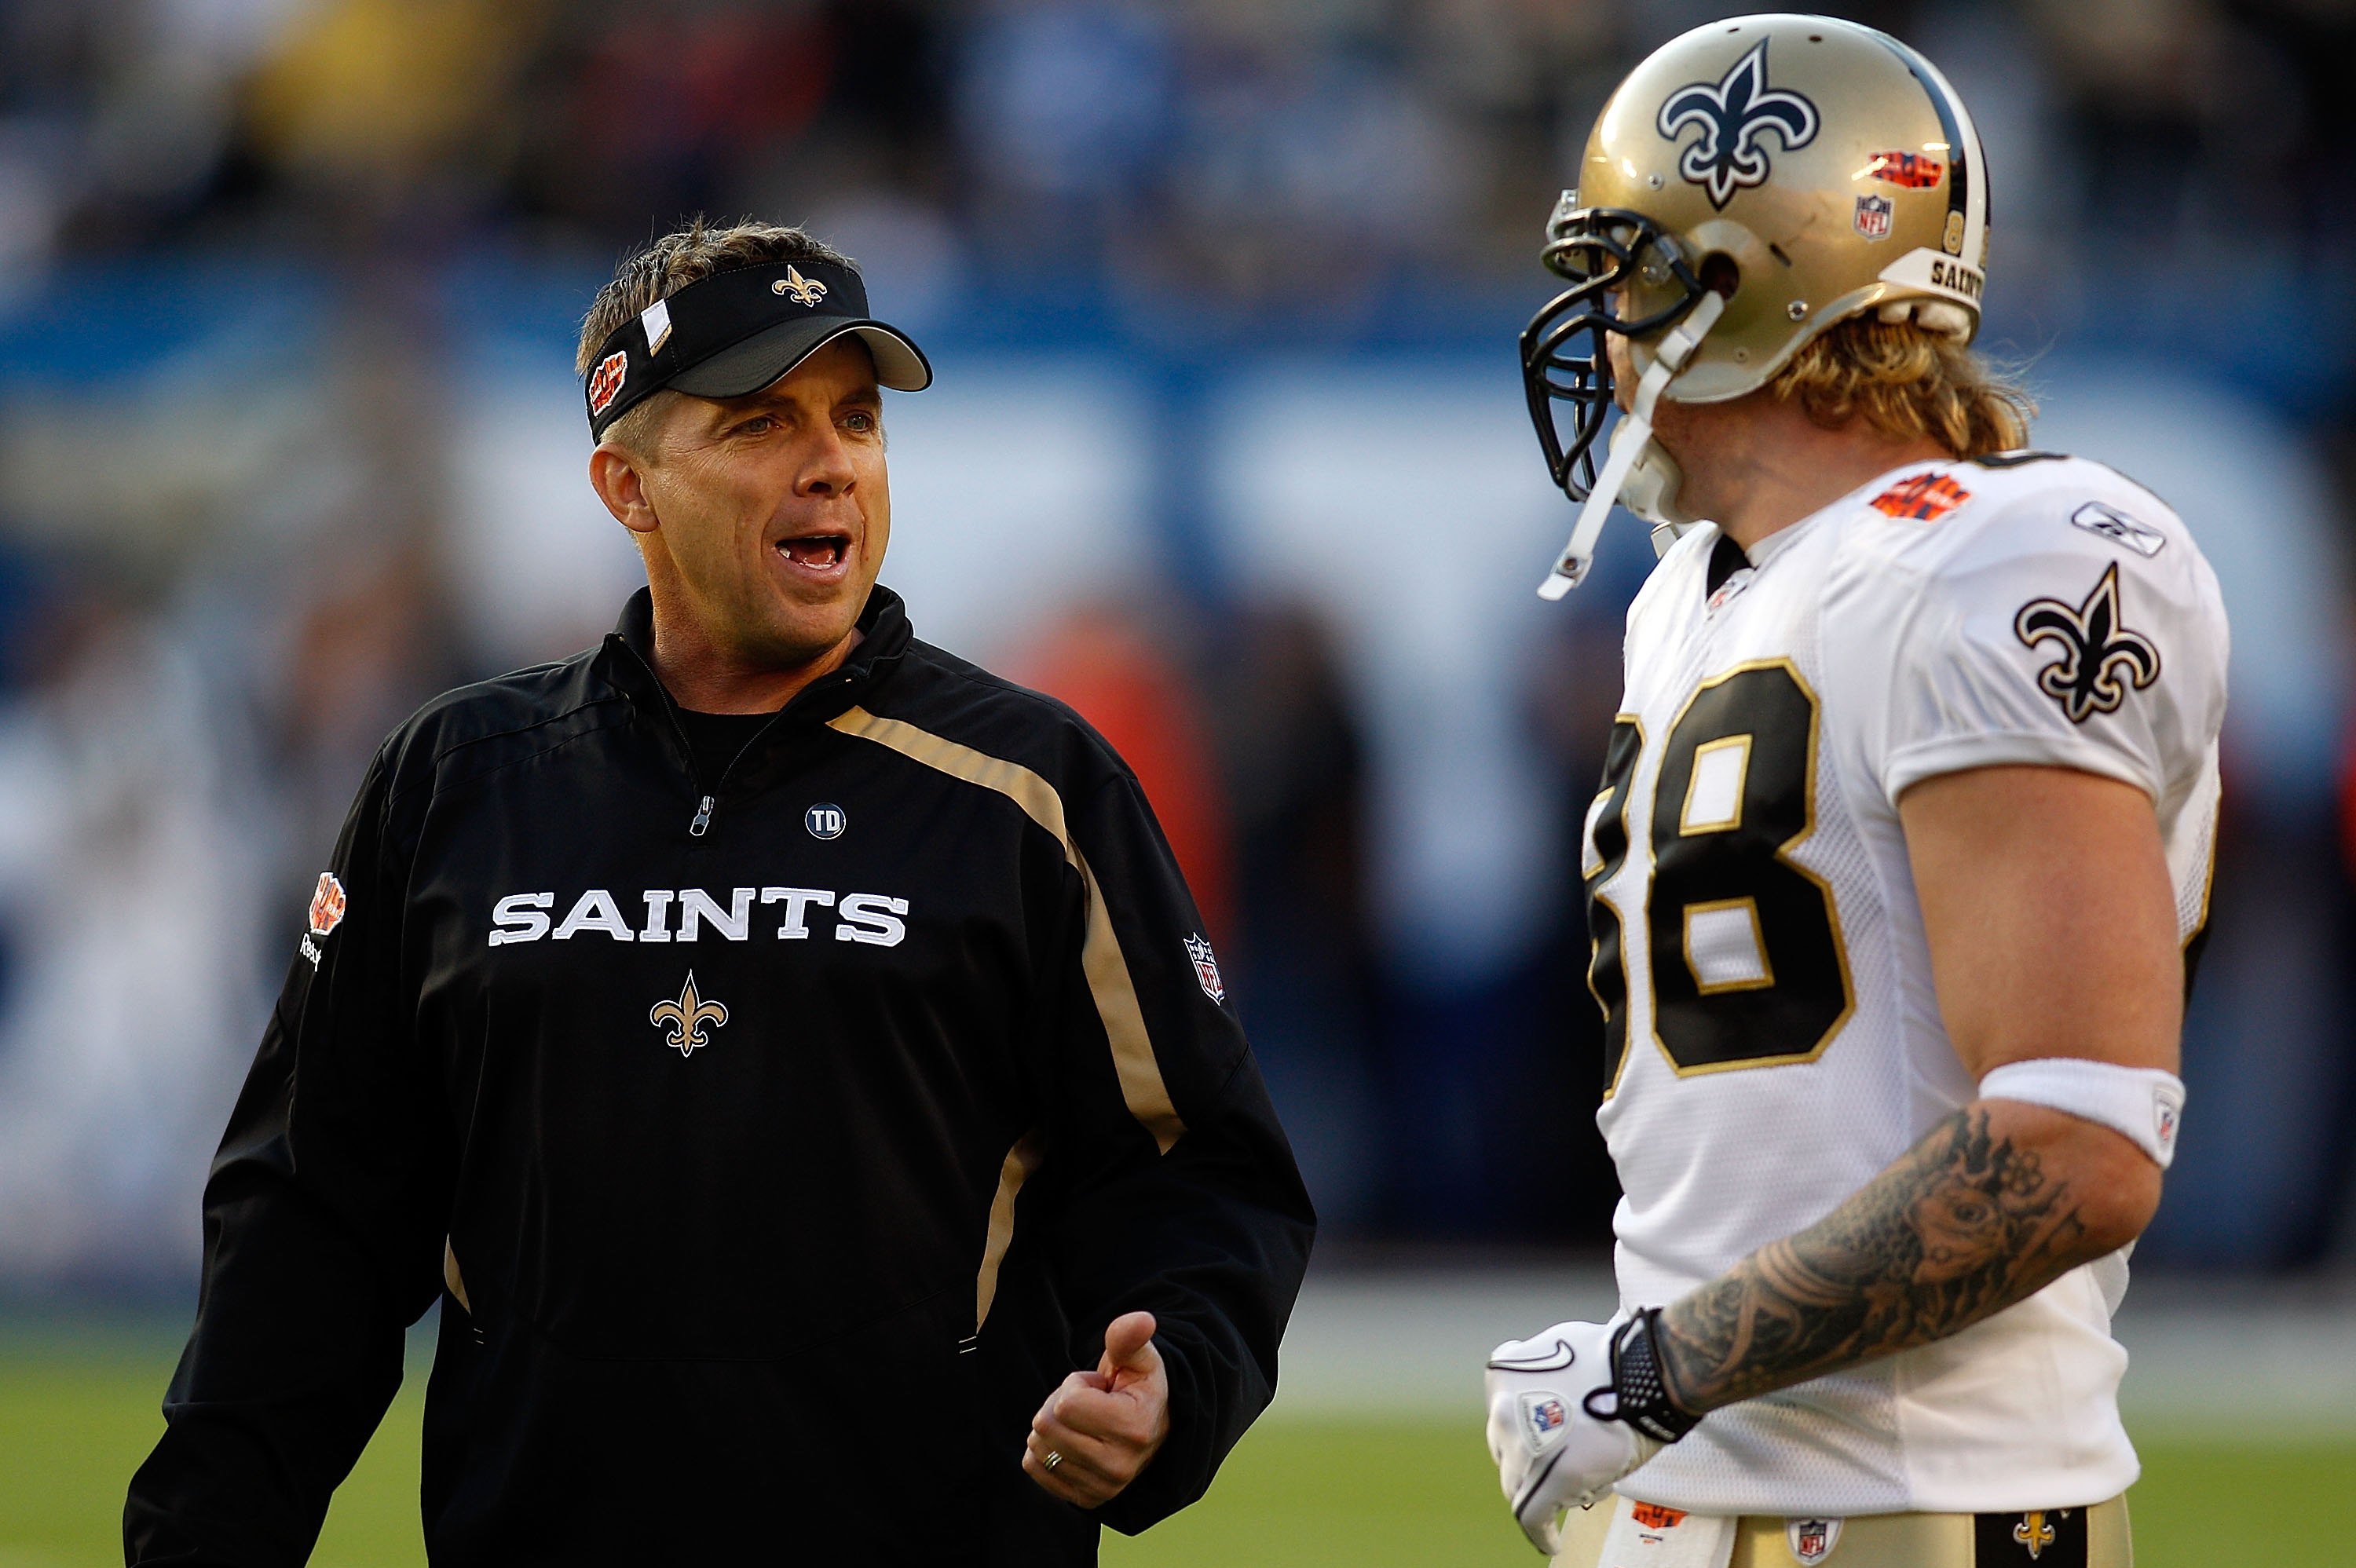 Jeremy Shockey Snitch Allegations Bring Out the Worst in Modern